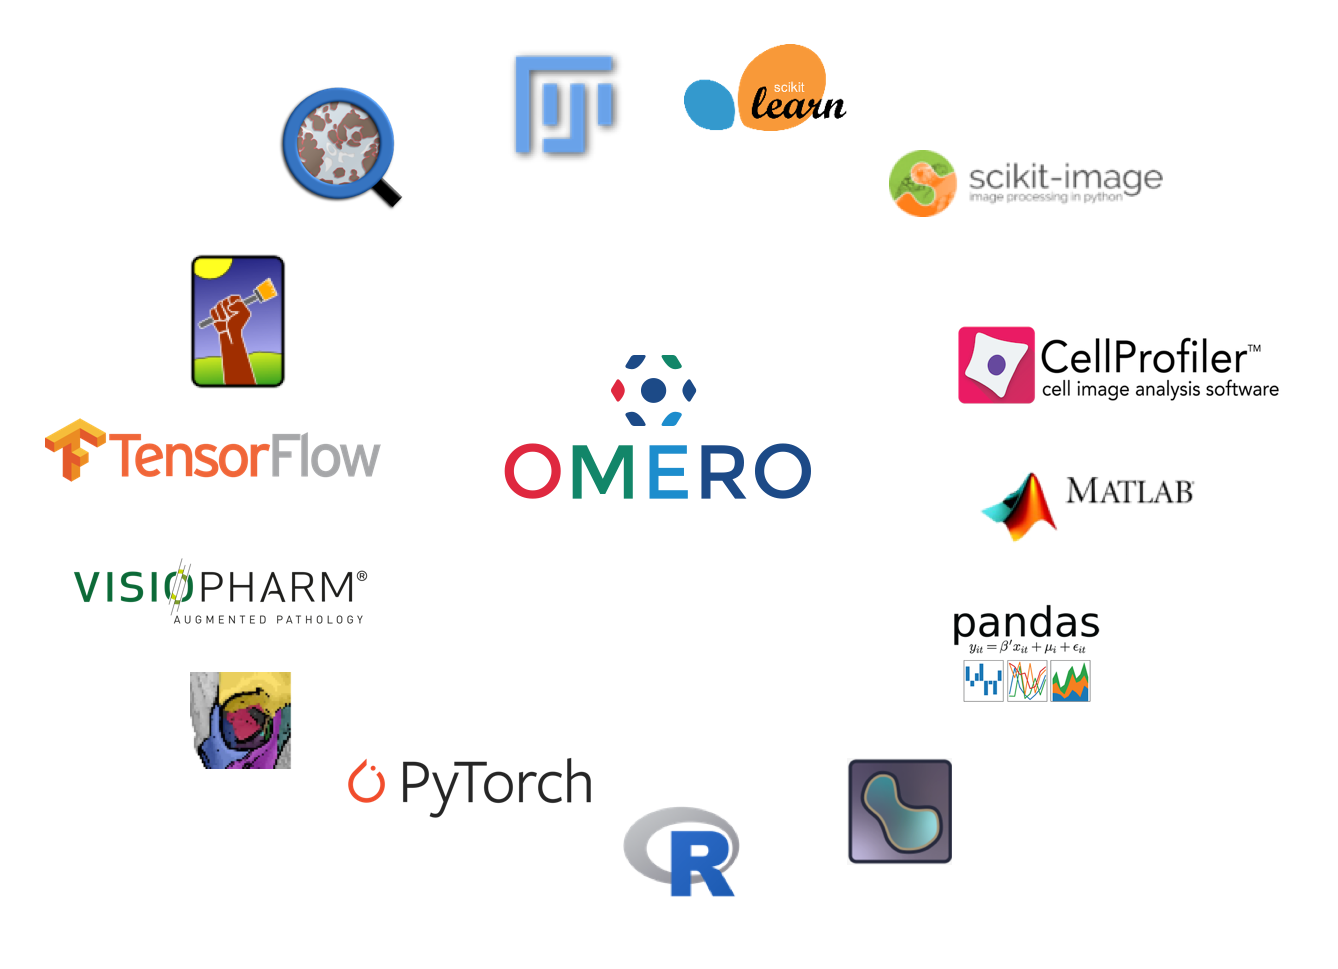 3rd party tools and OMERO.